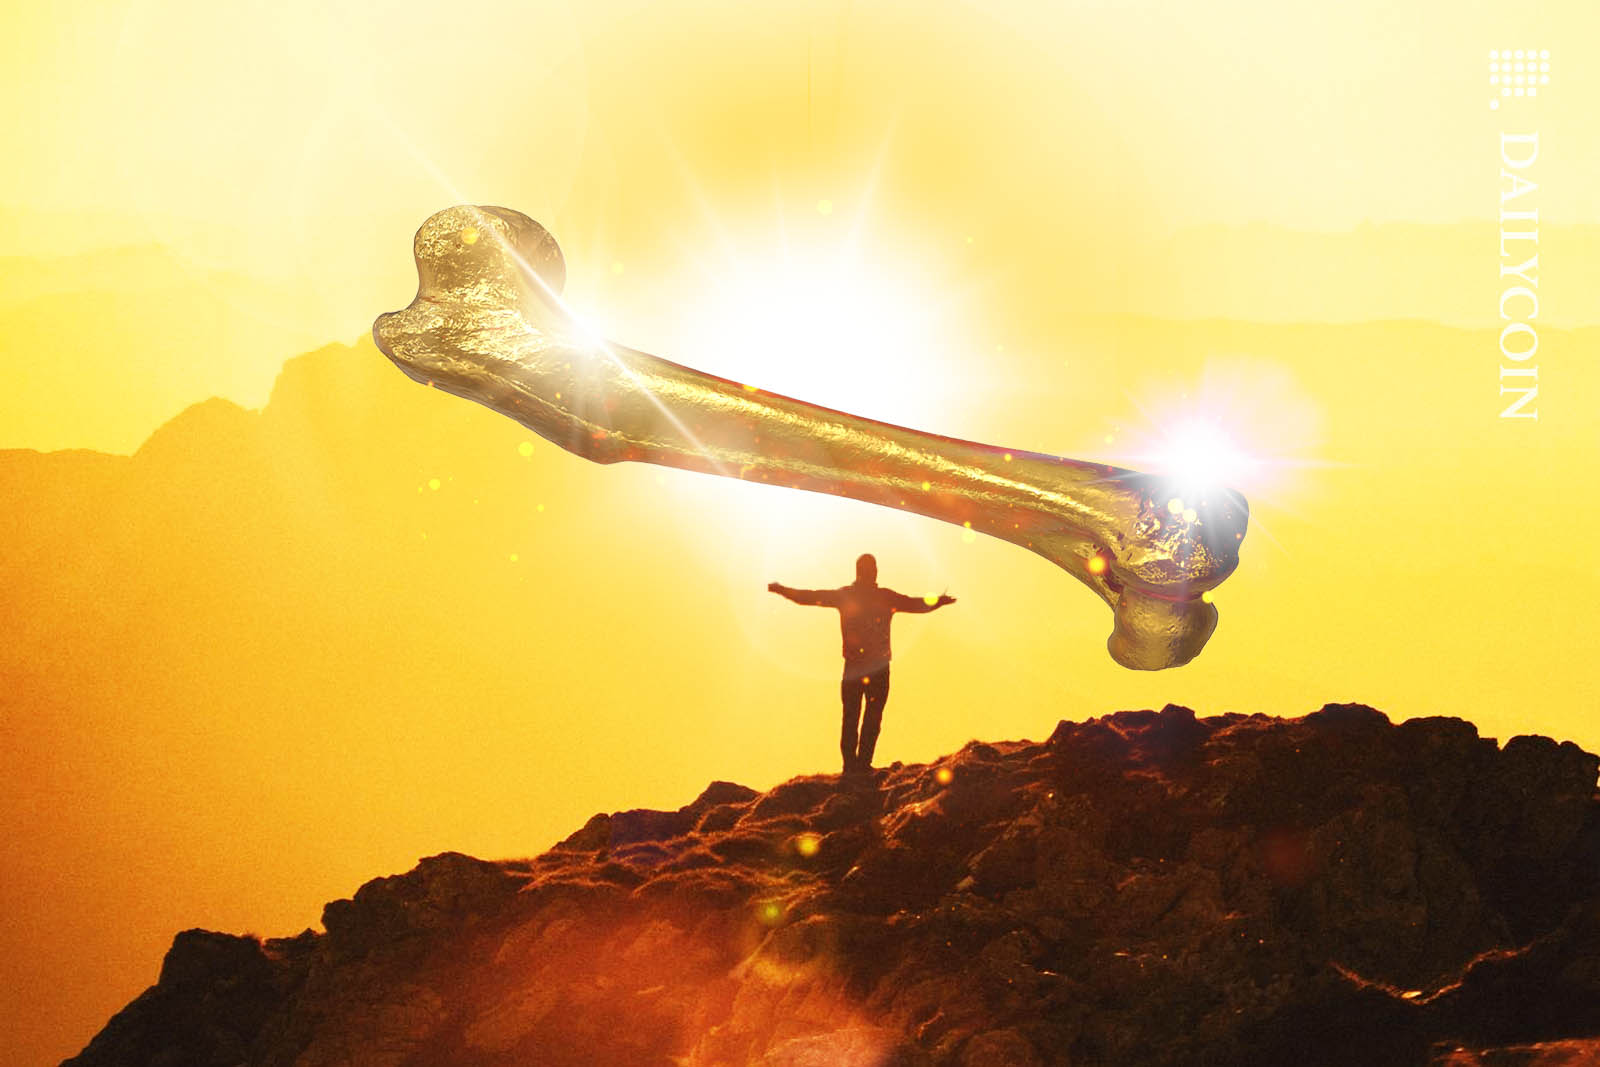 man standing on the edge admiring a giant golden bone levitating above a cliff.